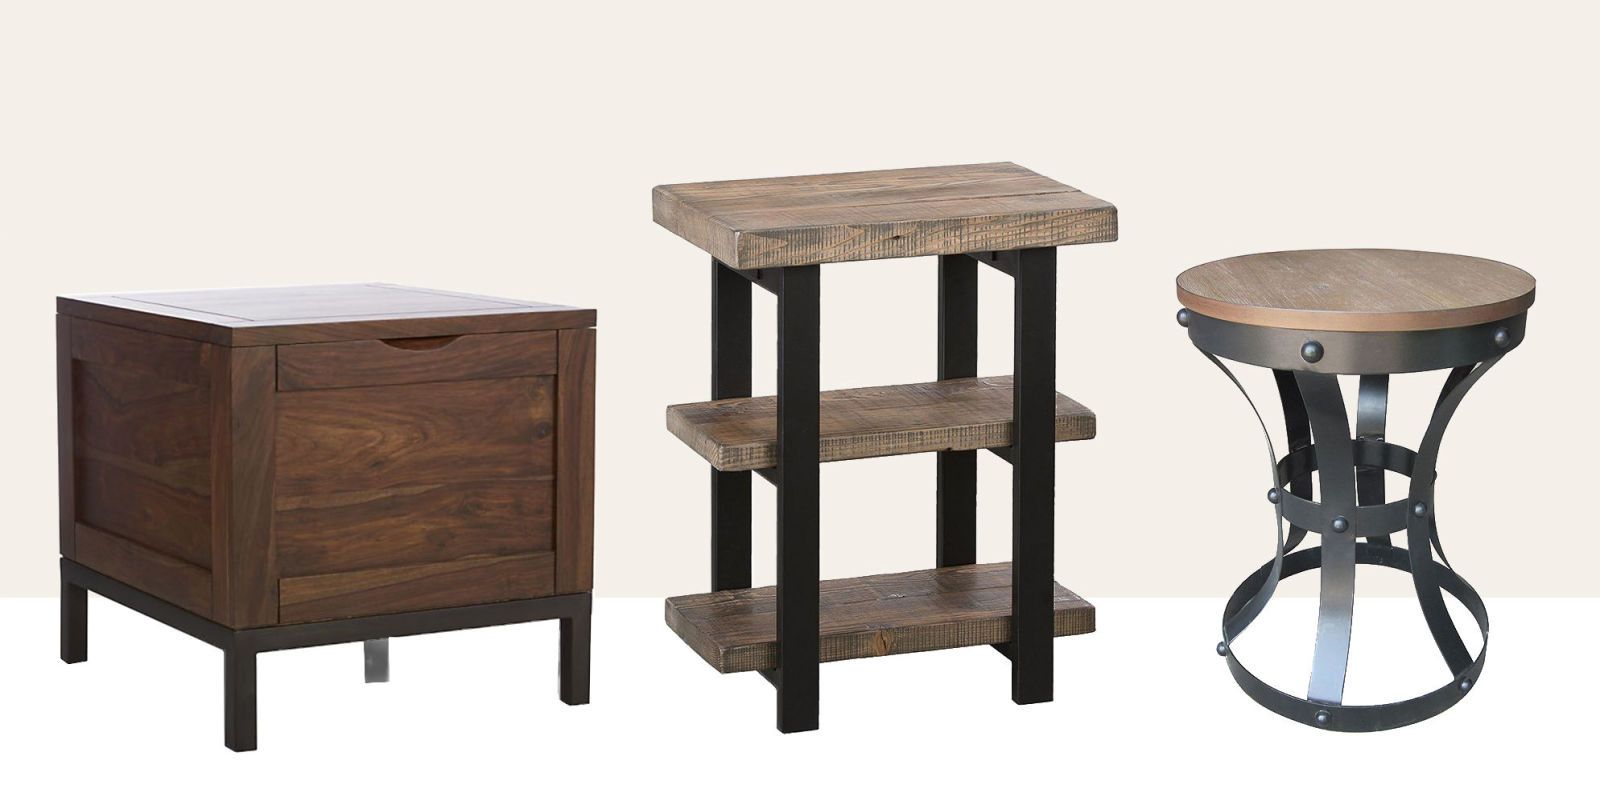 rustic end tables 24 inches high